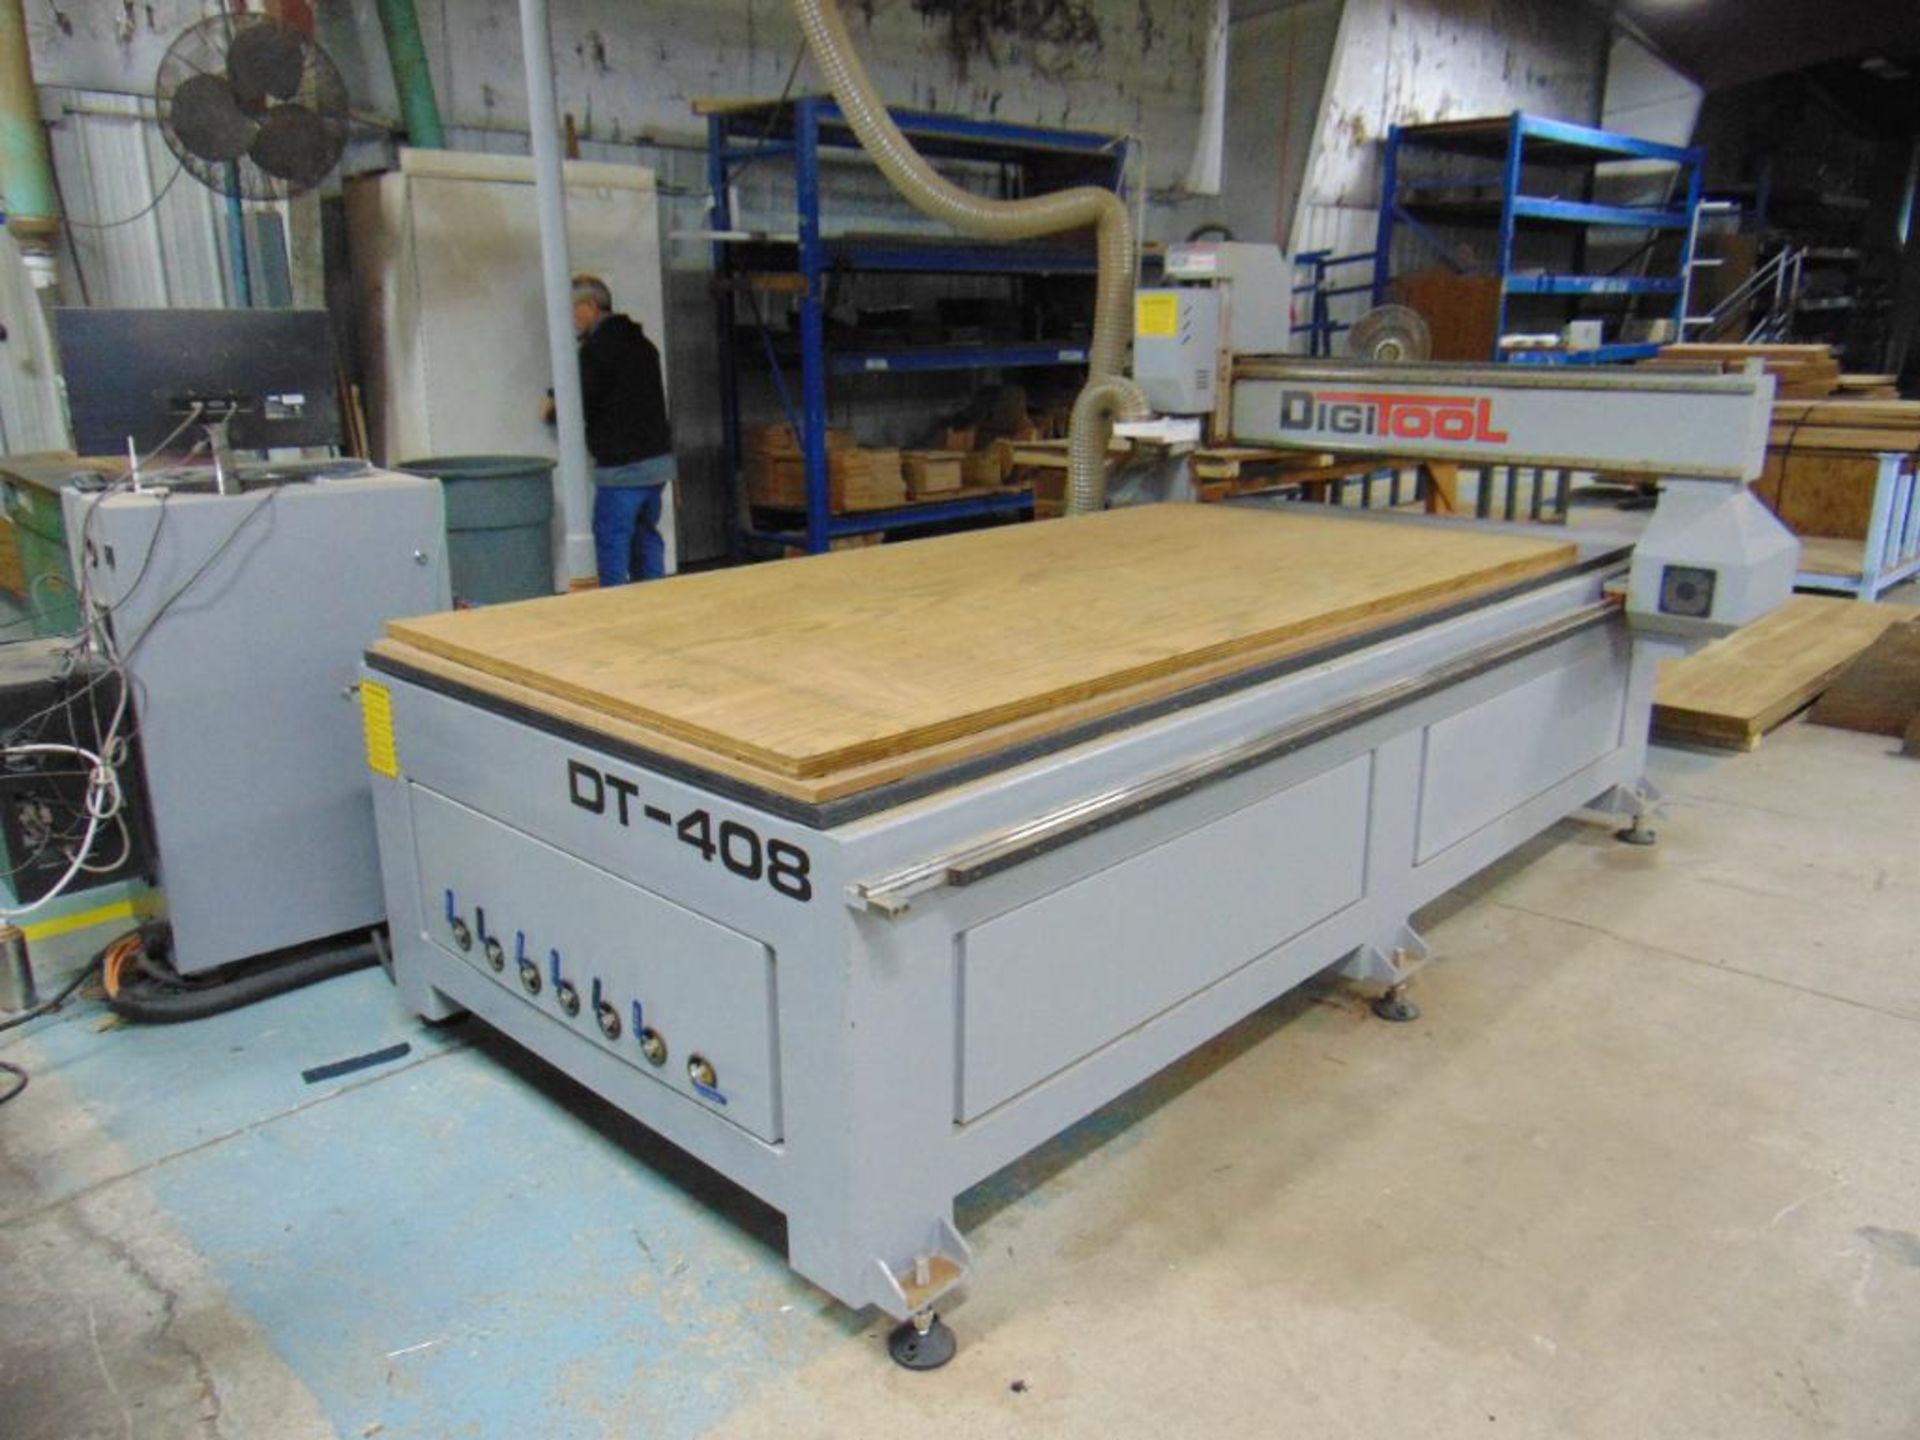 Digitool Model DT408 CNC Router - Image 4 of 9